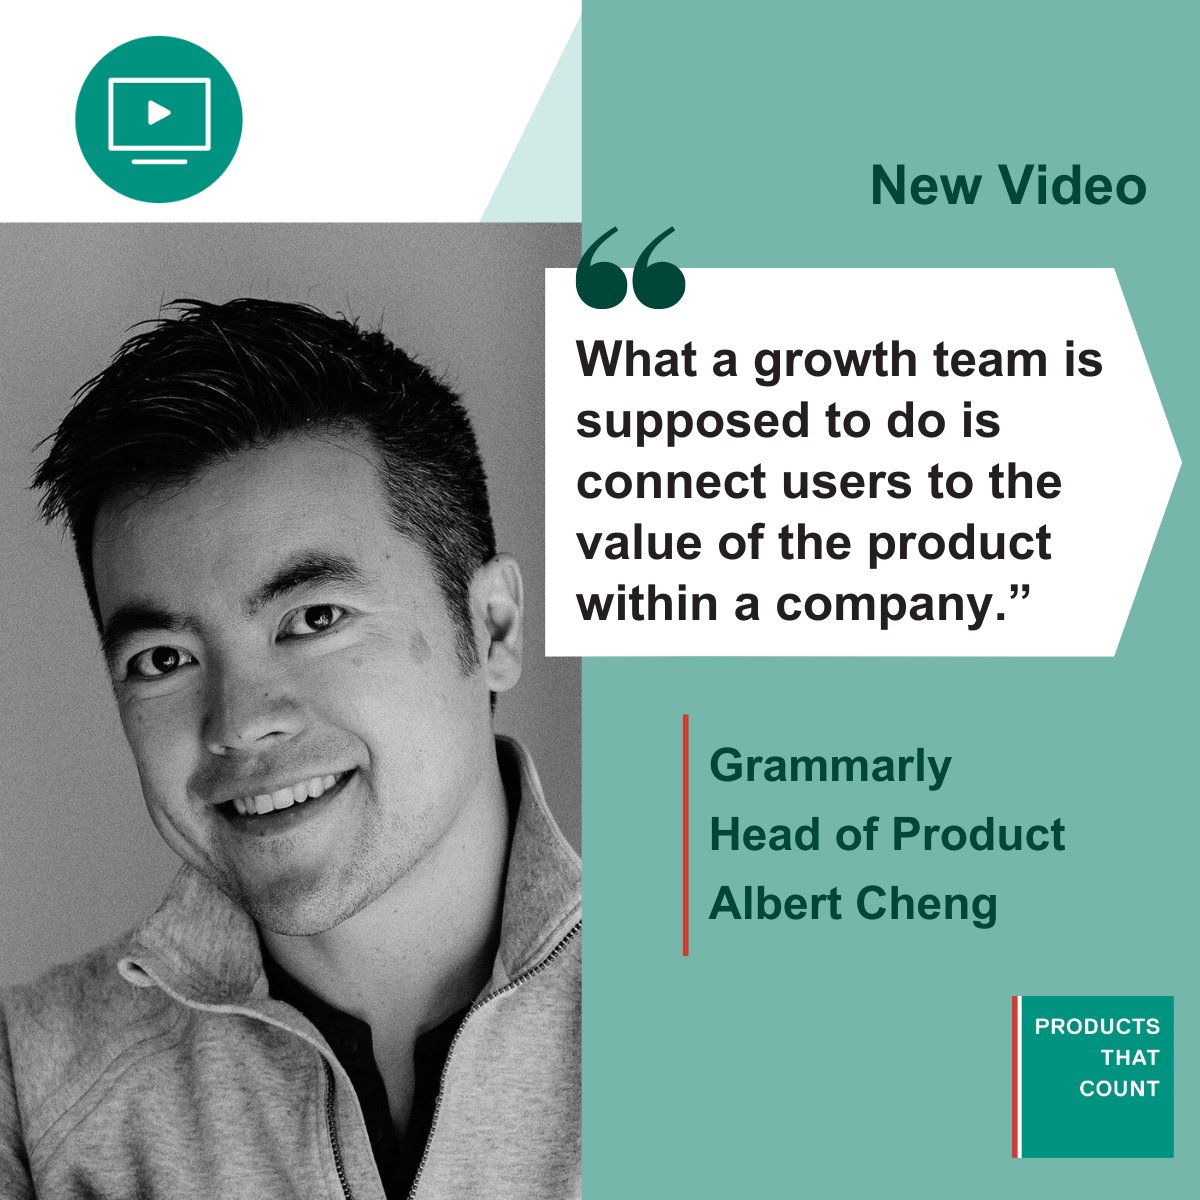 Did you miss our latest webinar hosted by Denise Hemke? On Wednesday, Grammarly Head of Product Albert Cheng speaks on building & scaling growth teams. He shares key lessons learned from hiring Growth teams at Grammarly, Duolingo, and numerous startups. youtube.com/watch?v=f4iZvp…